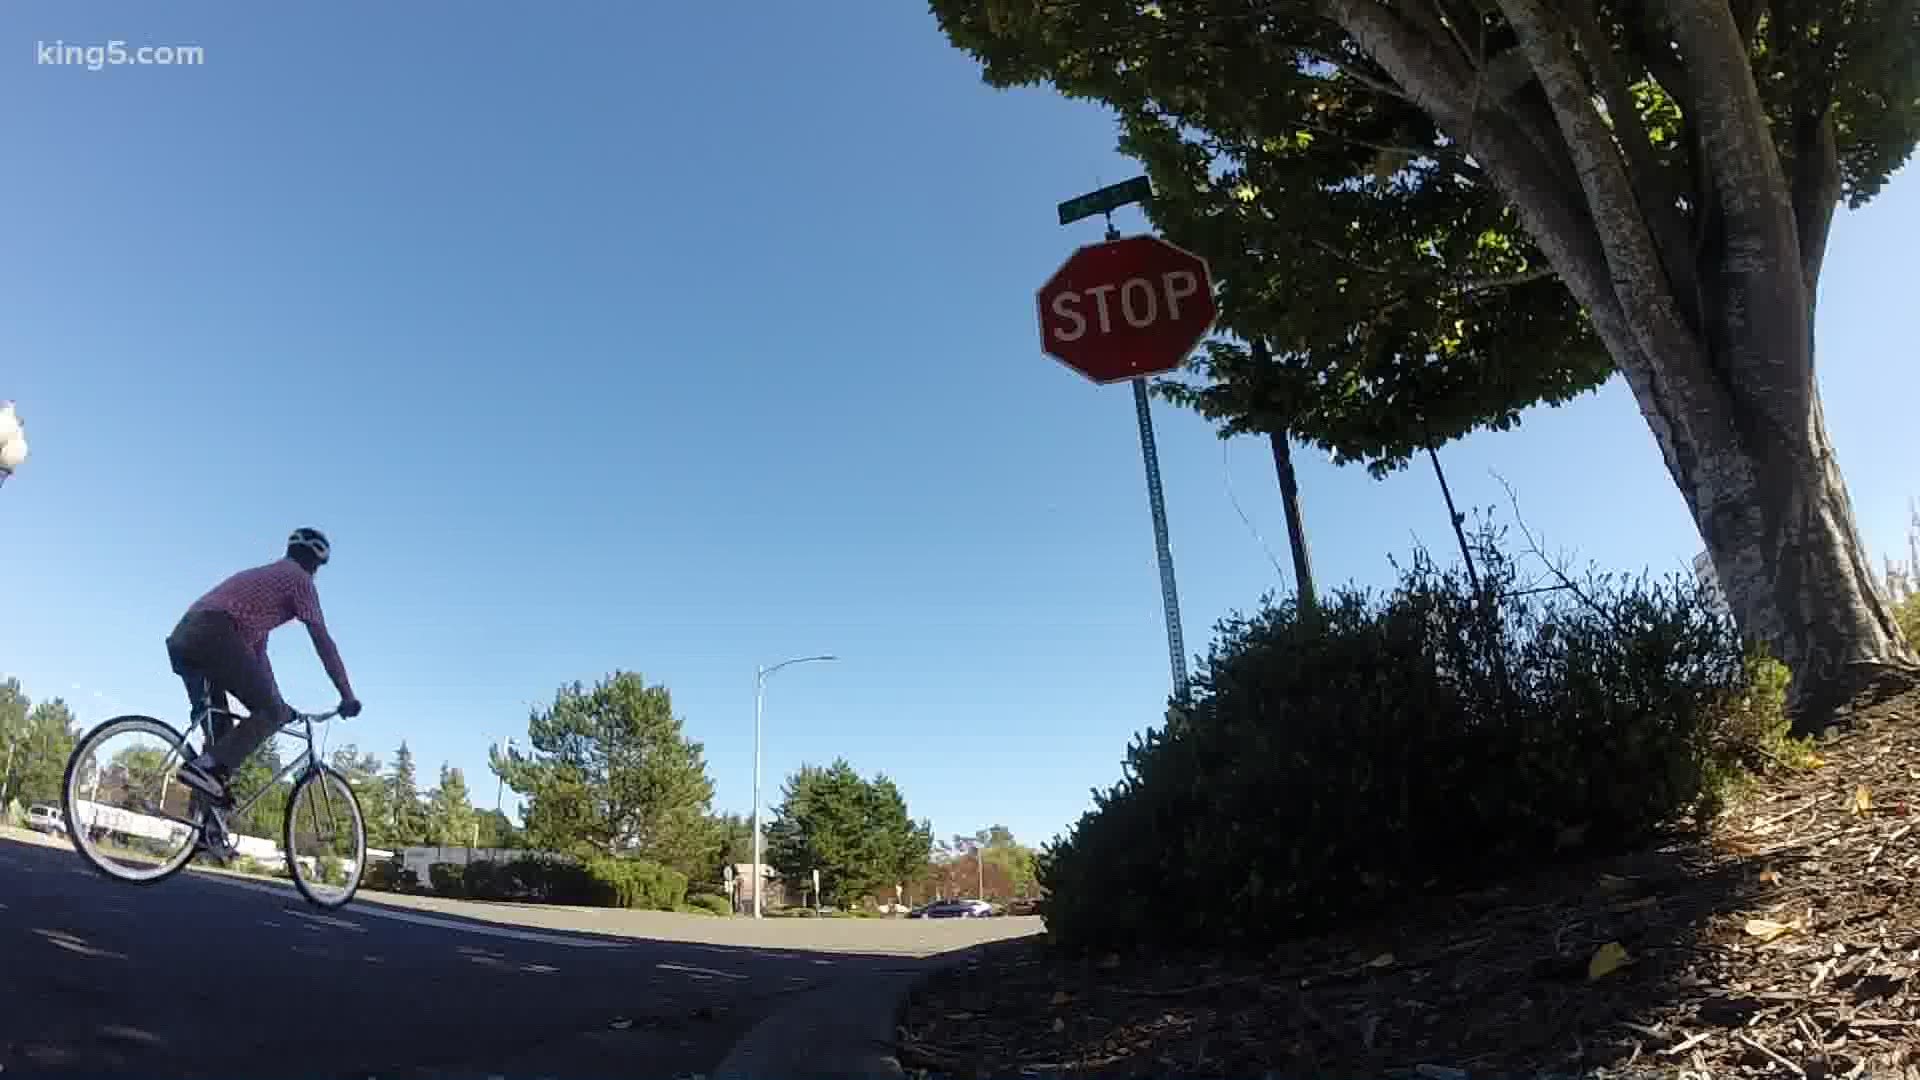 A new law allows bicyclists to roll through stop signs, but they must still give the right-of-way to vehicles at intersections.